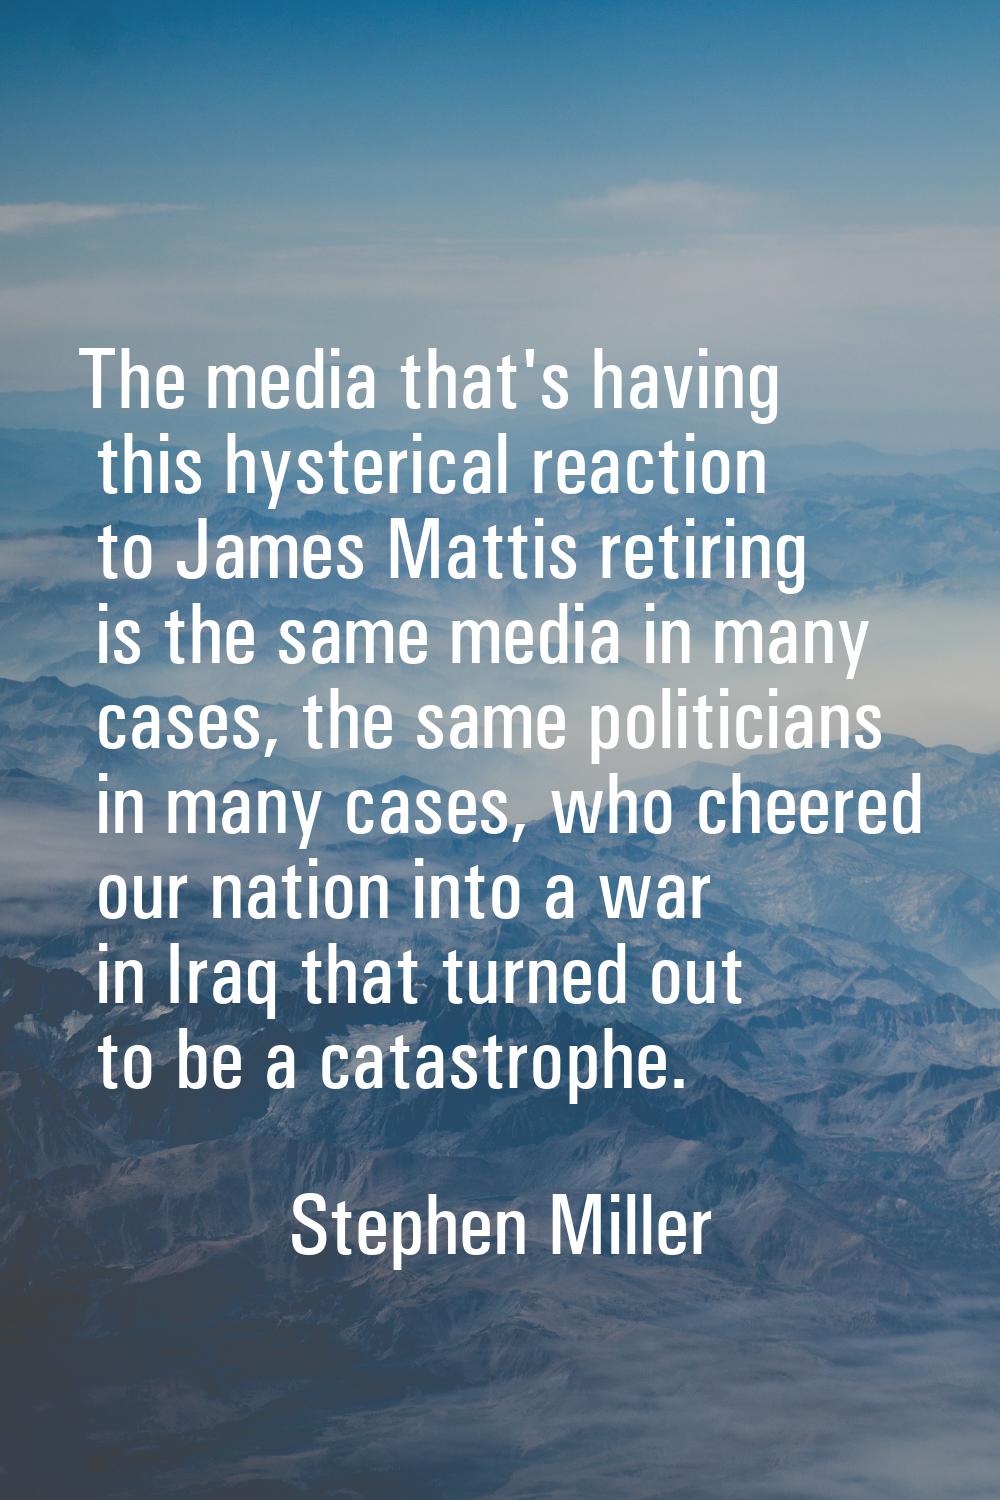 The media that's having this hysterical reaction to James Mattis retiring is the same media in many